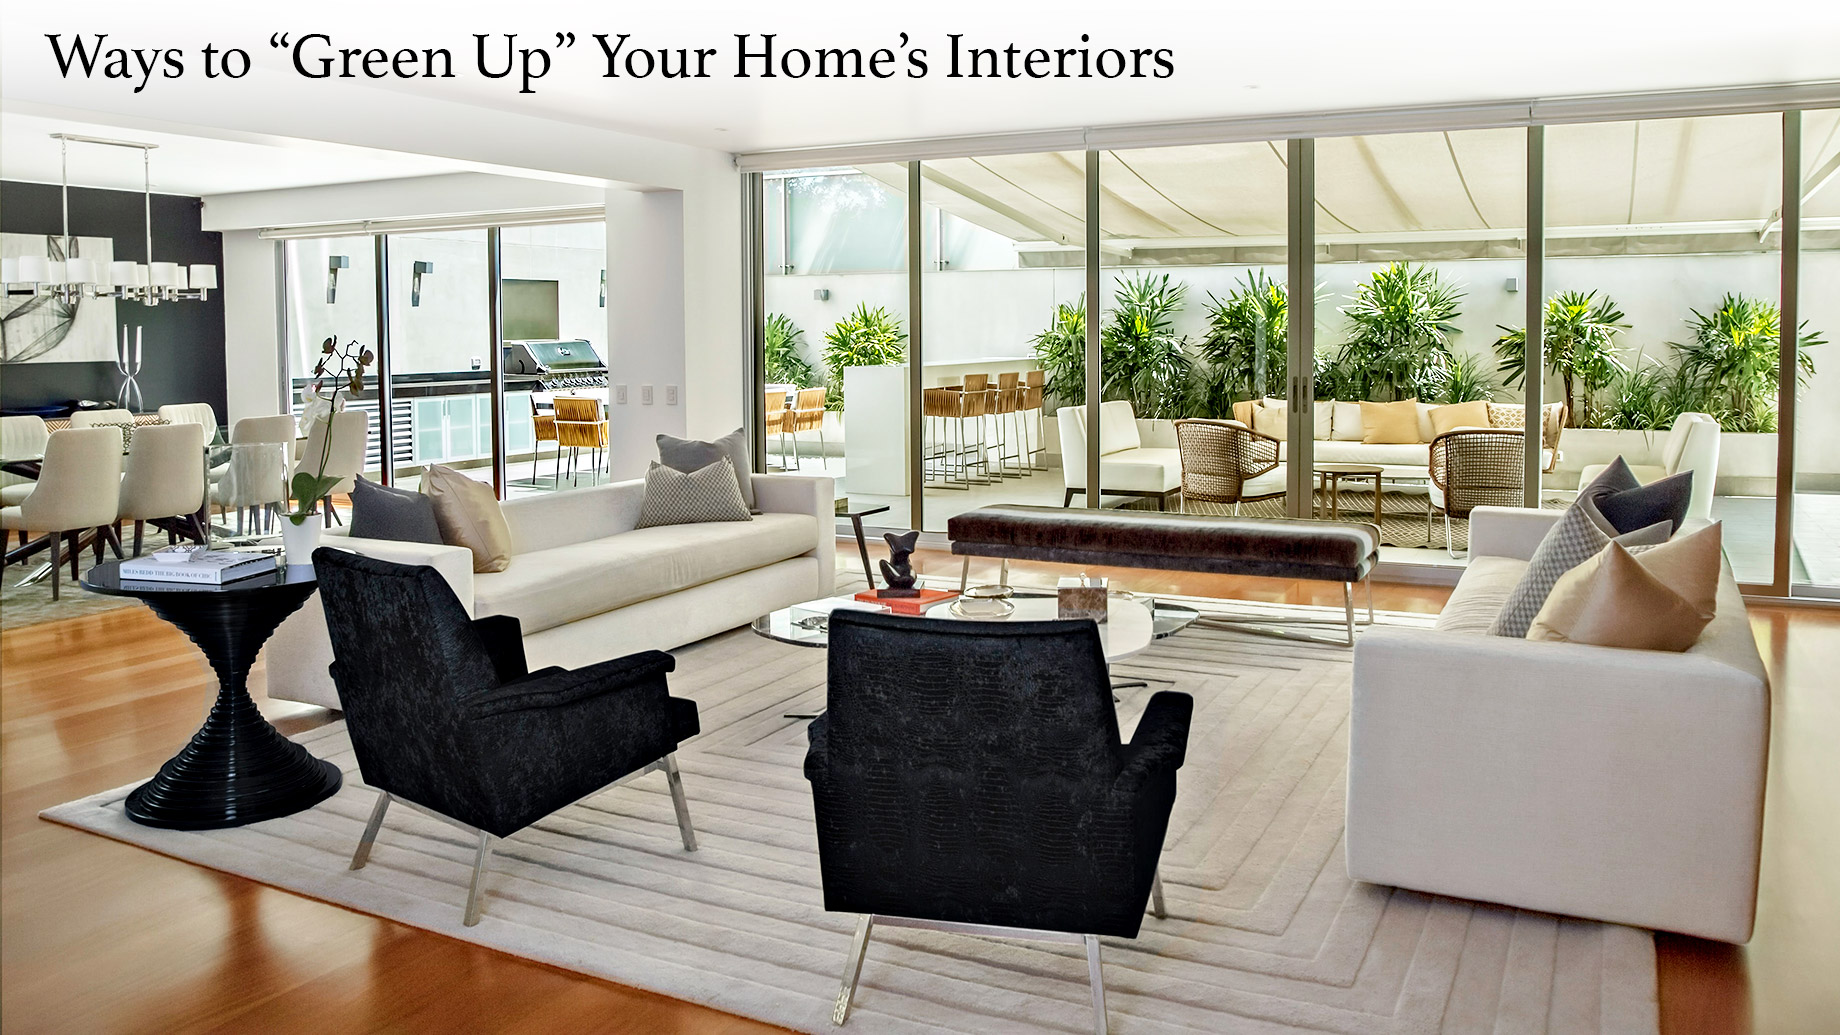 From the Inside-Out - Ways to “Green Up” Your Home’s Interiors